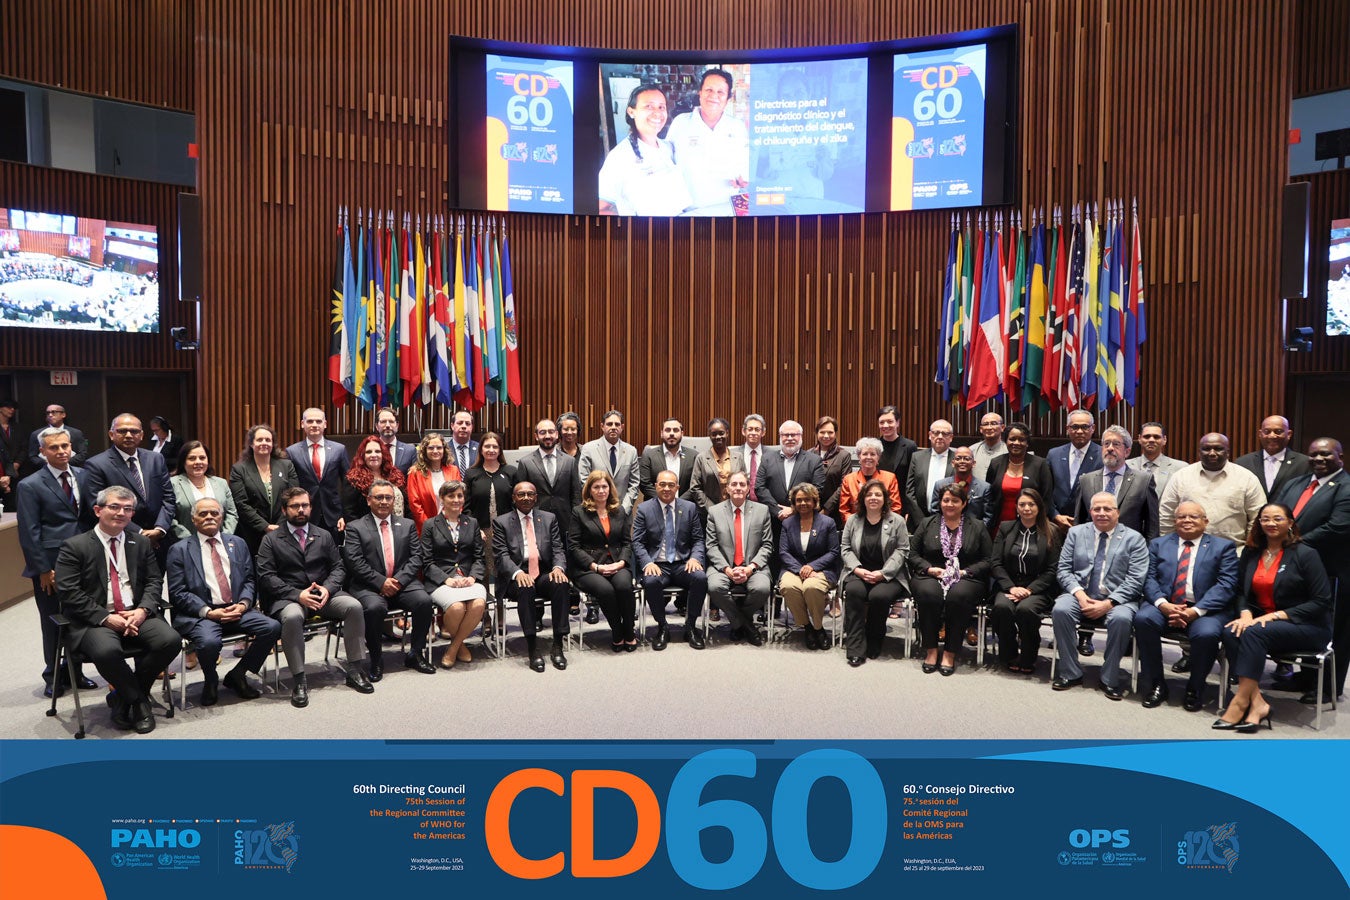 Participants of the 60th Directing Council - Official photo